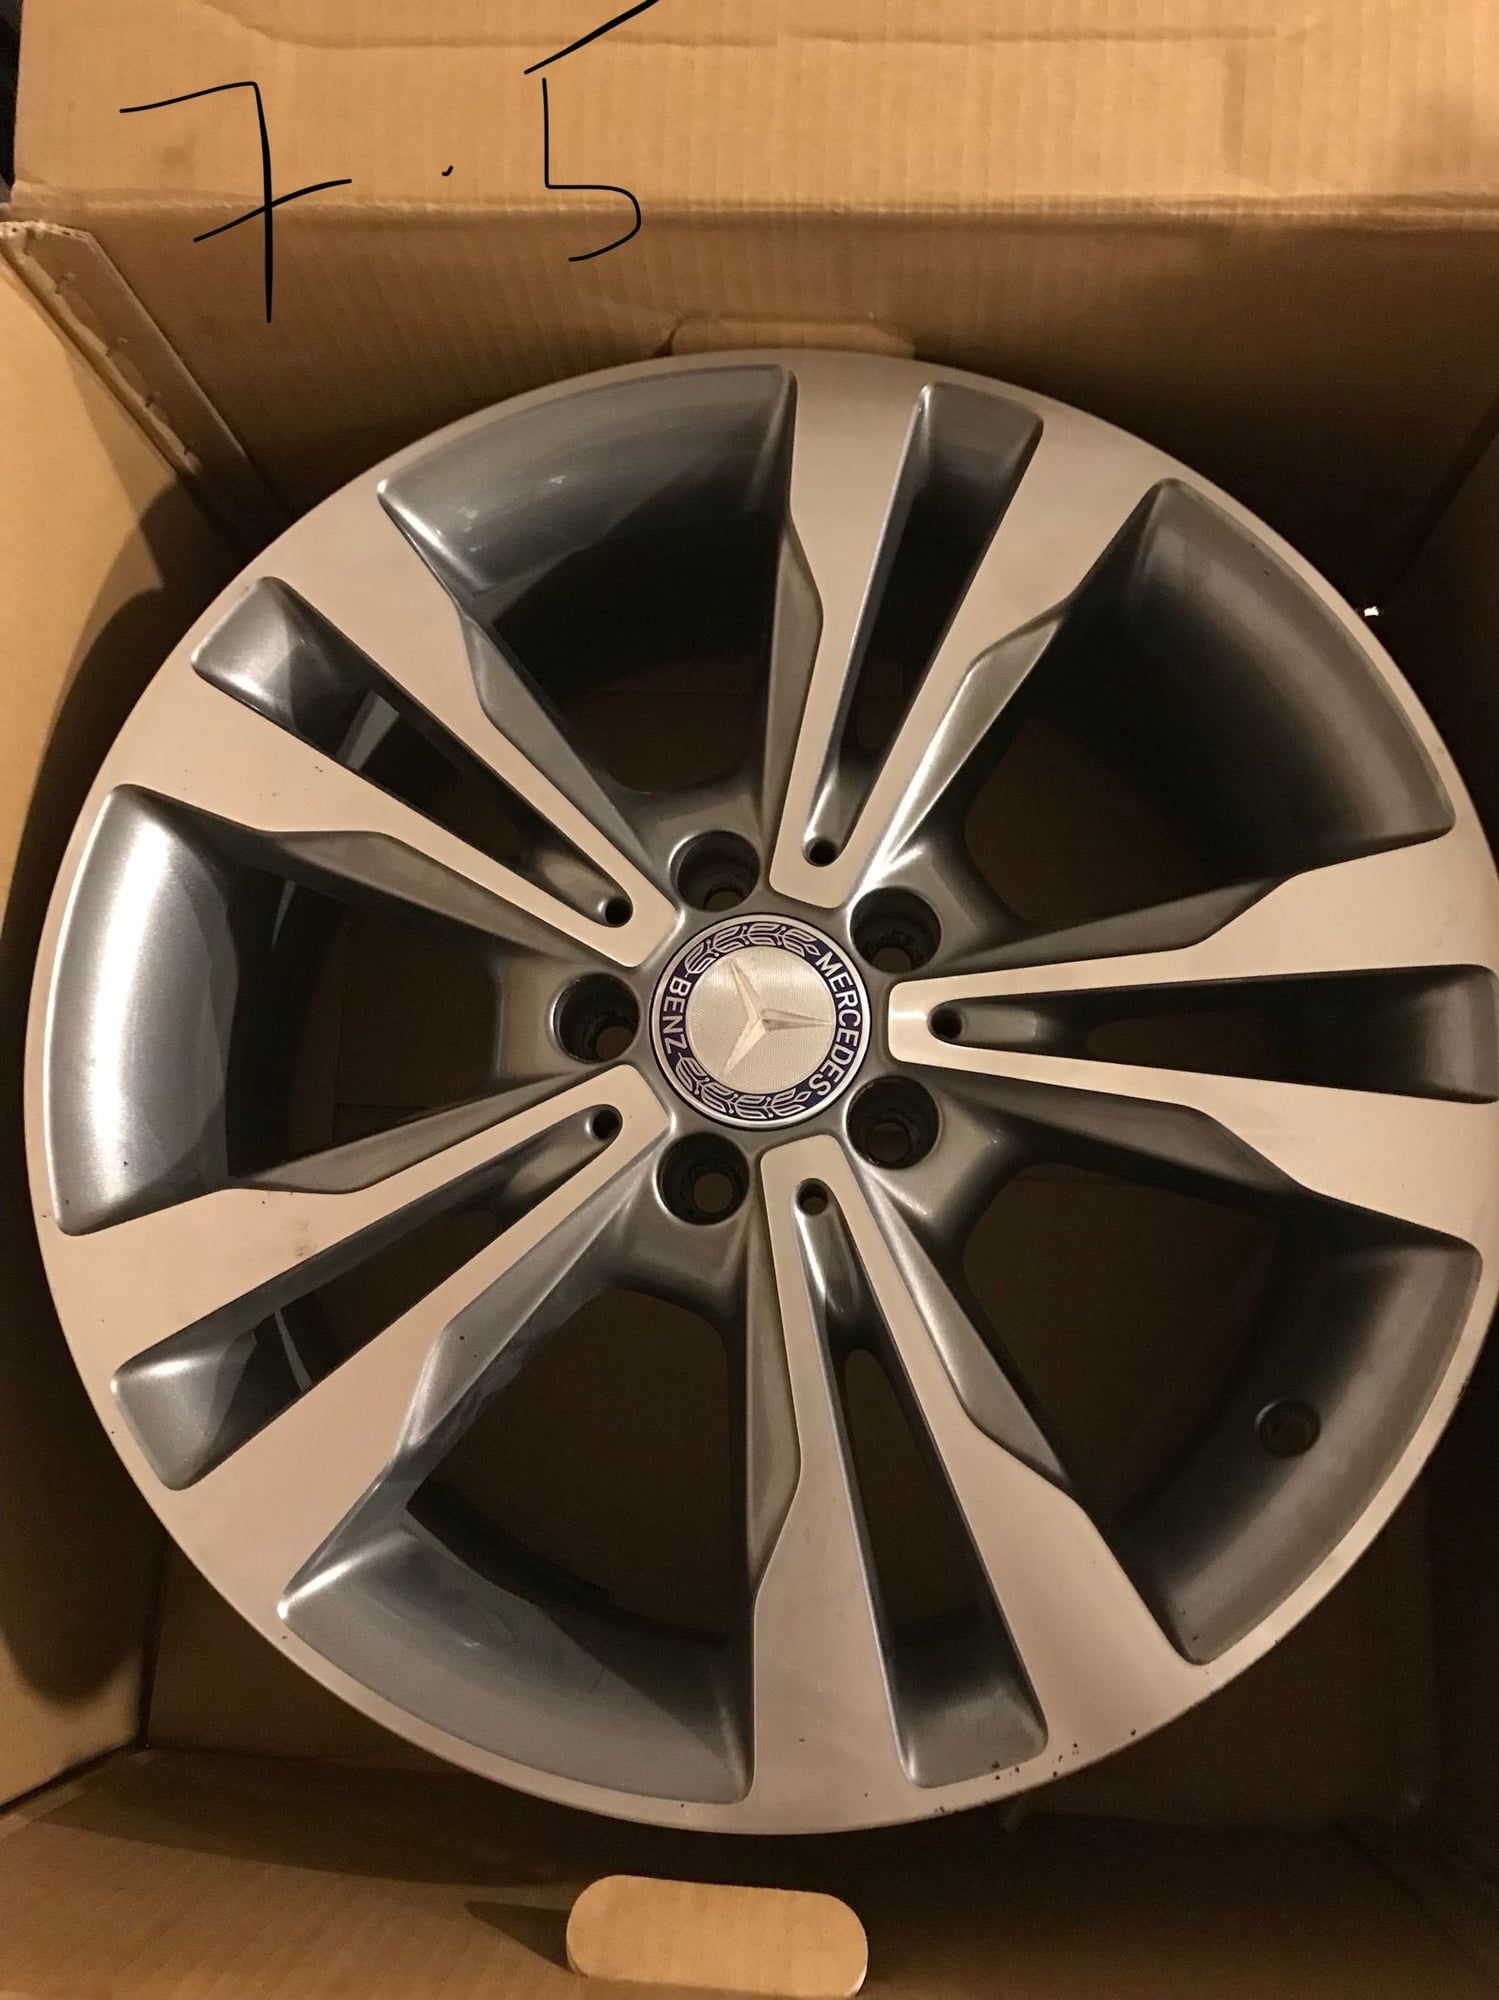 Wheels and Tires/Axles - OEM 18 inch Wheels for sale - Immaculate condition - Used - 2015 to 2019 Mercedes-Benz All Models - San Jose, CA 95133, United States